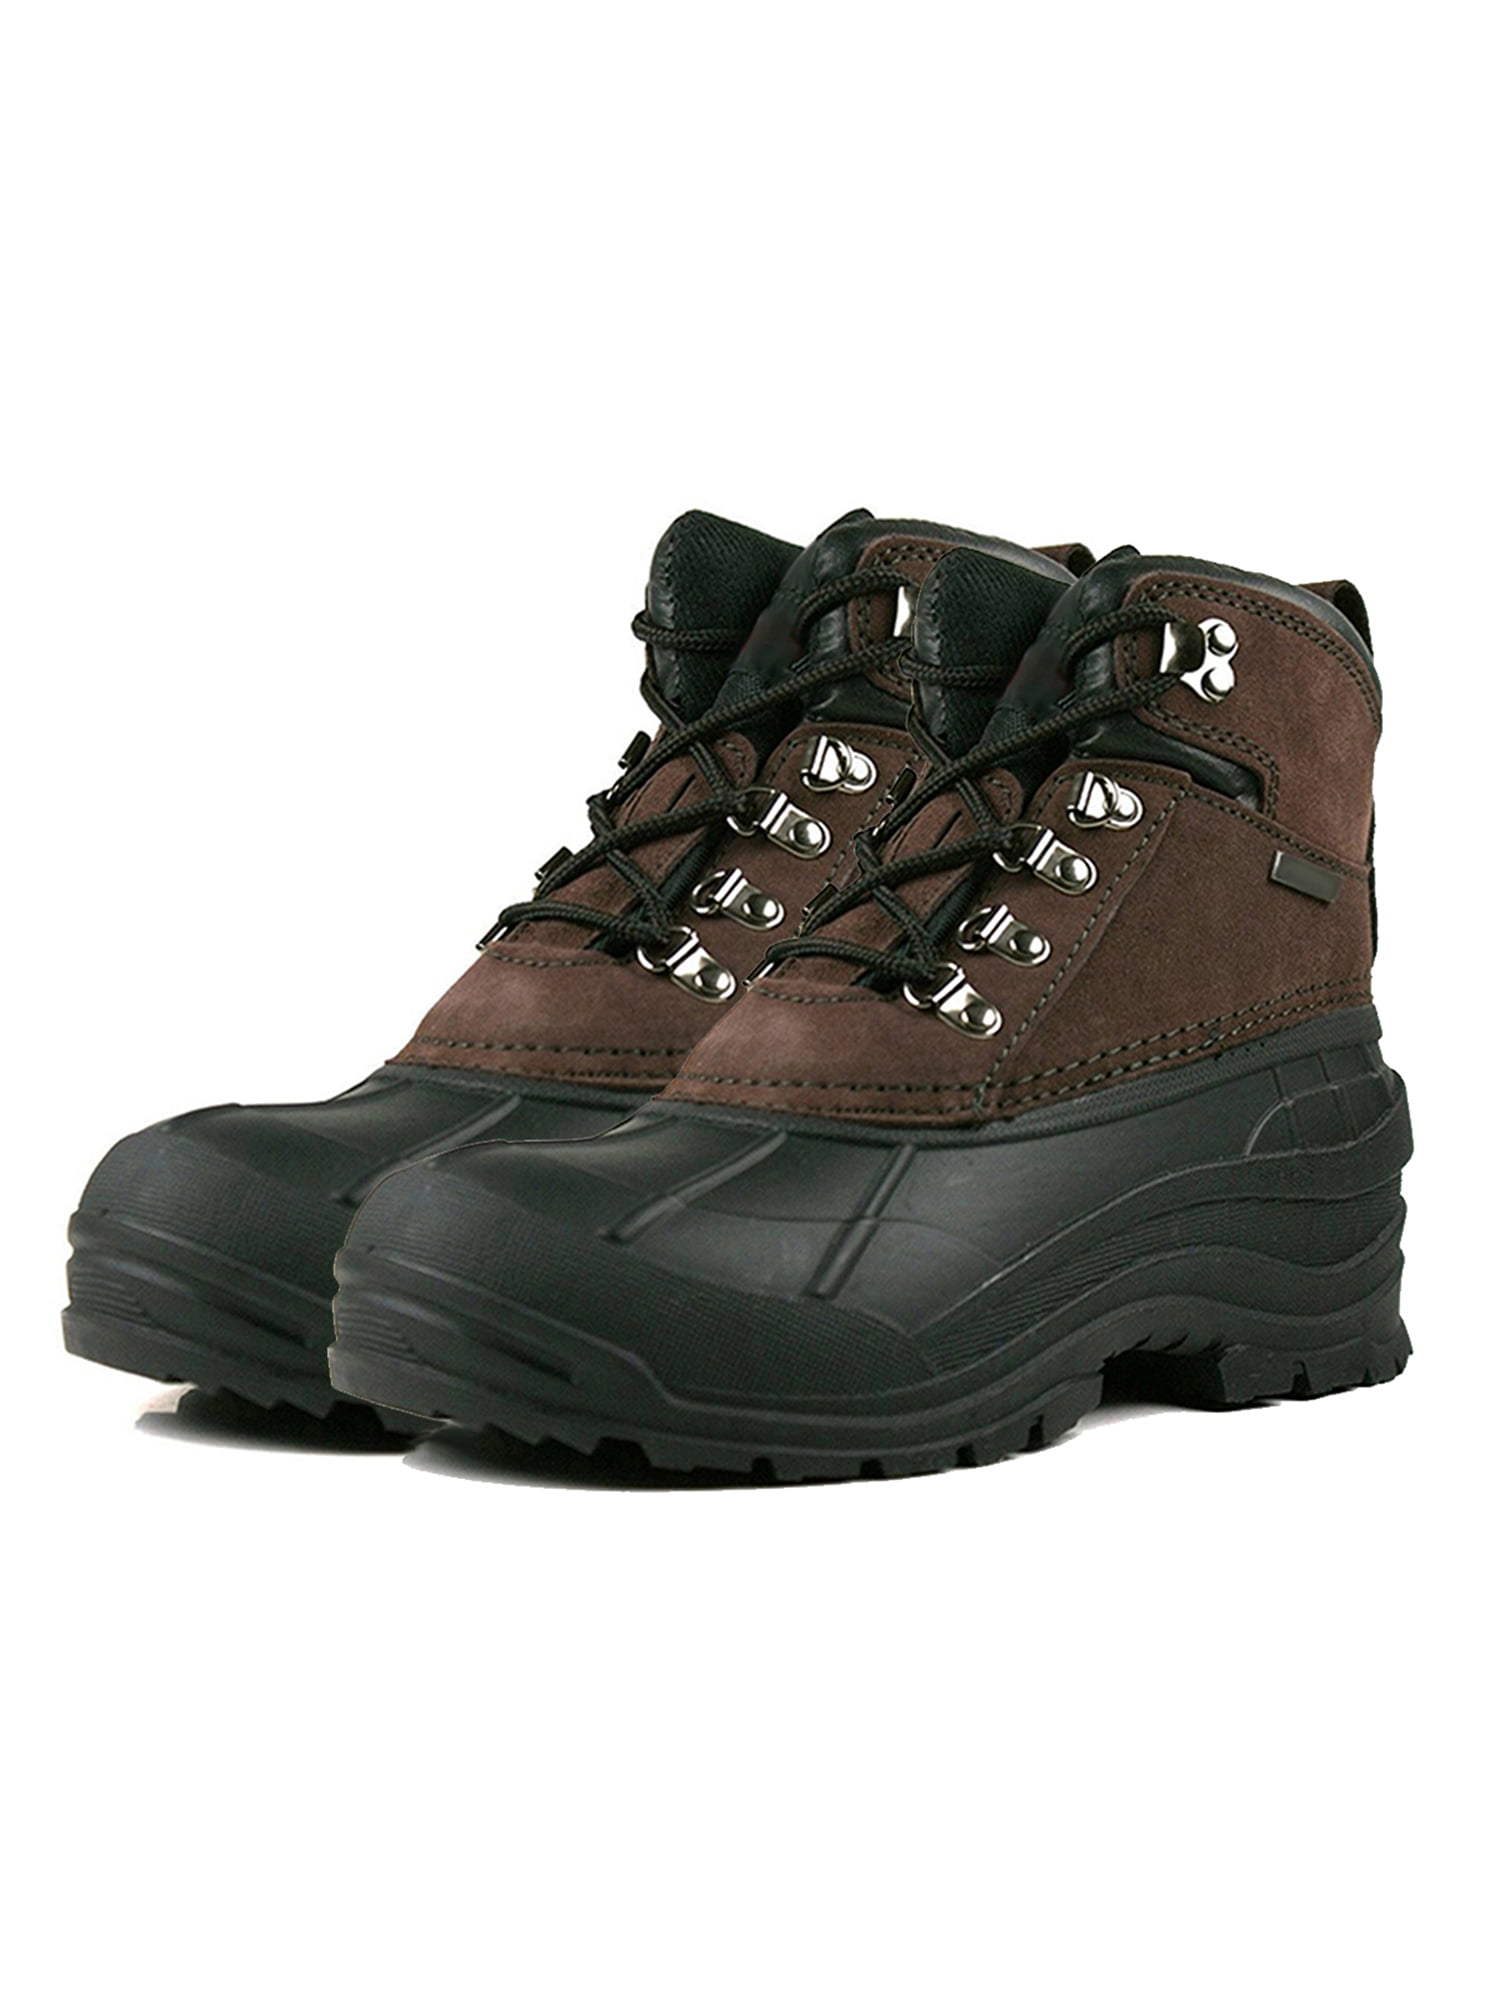 mens ankle snow boots